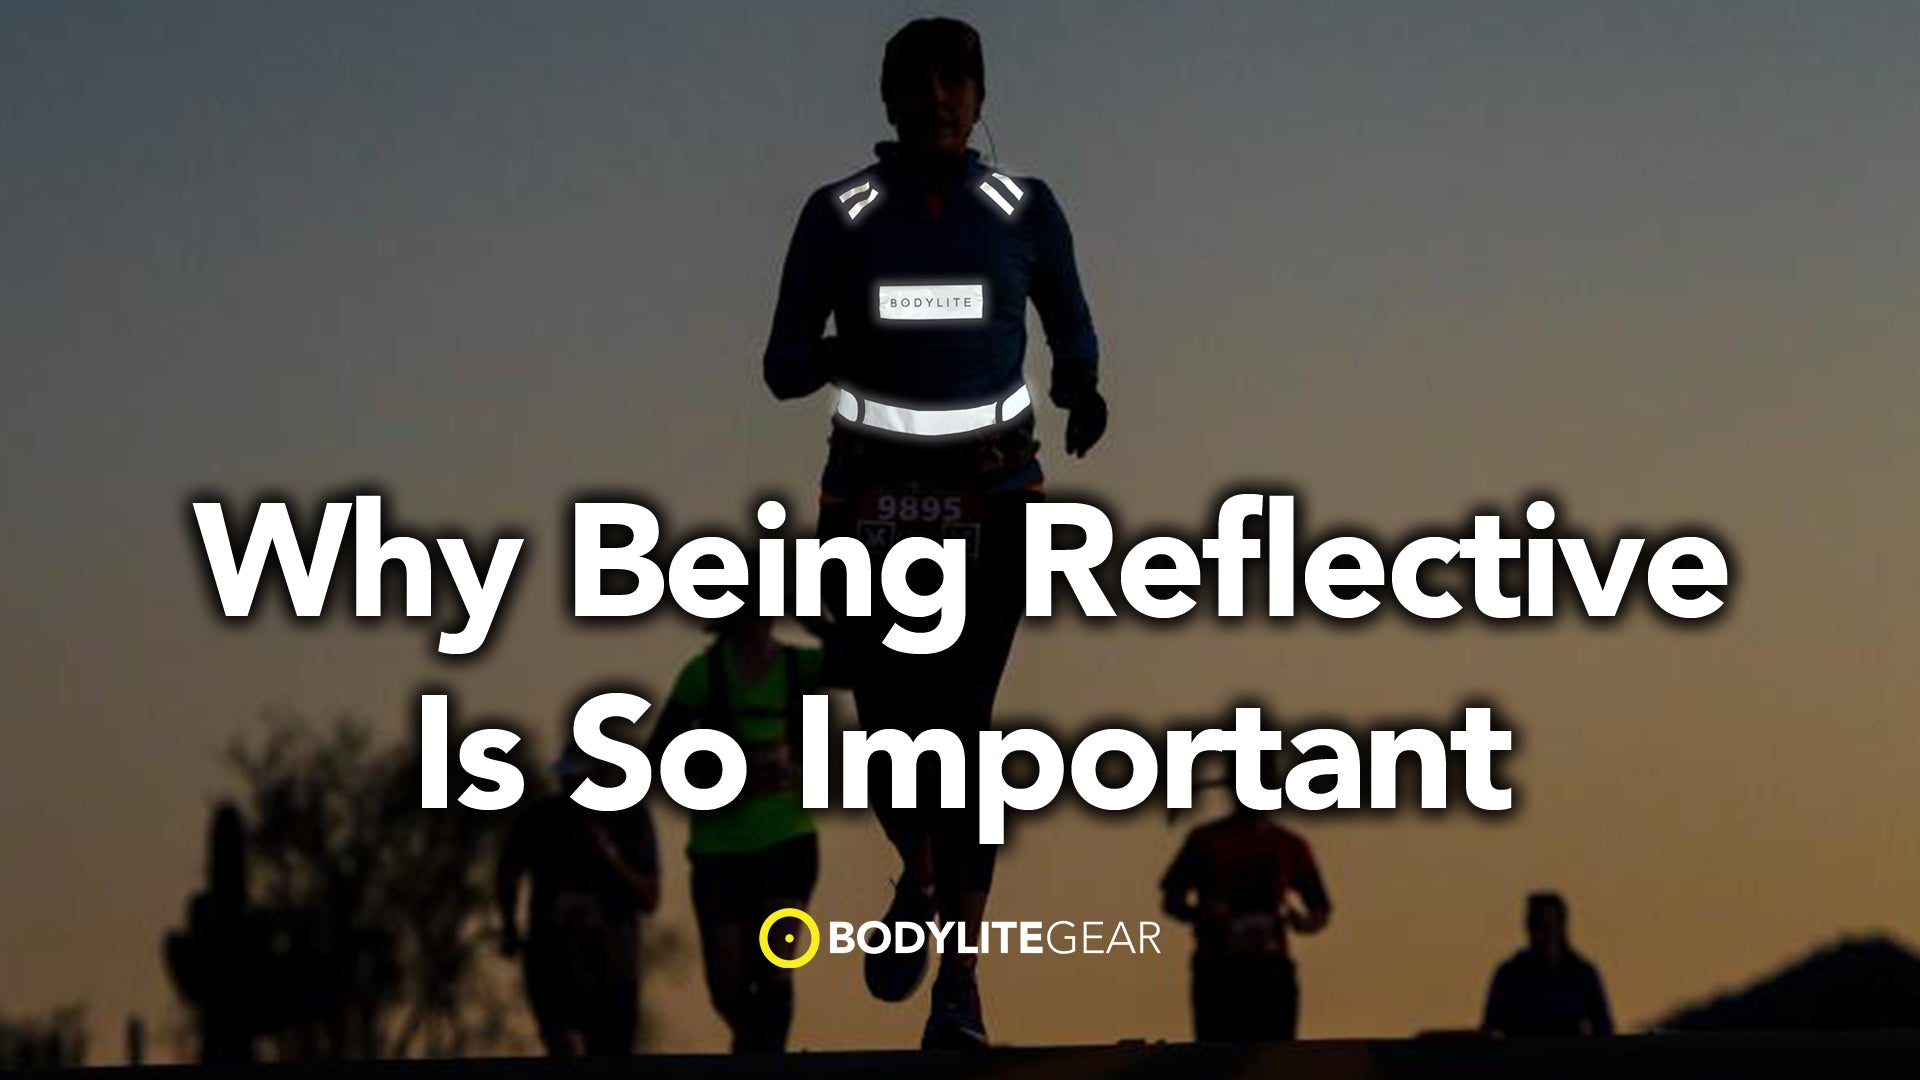 Why Being Reflective is so Important